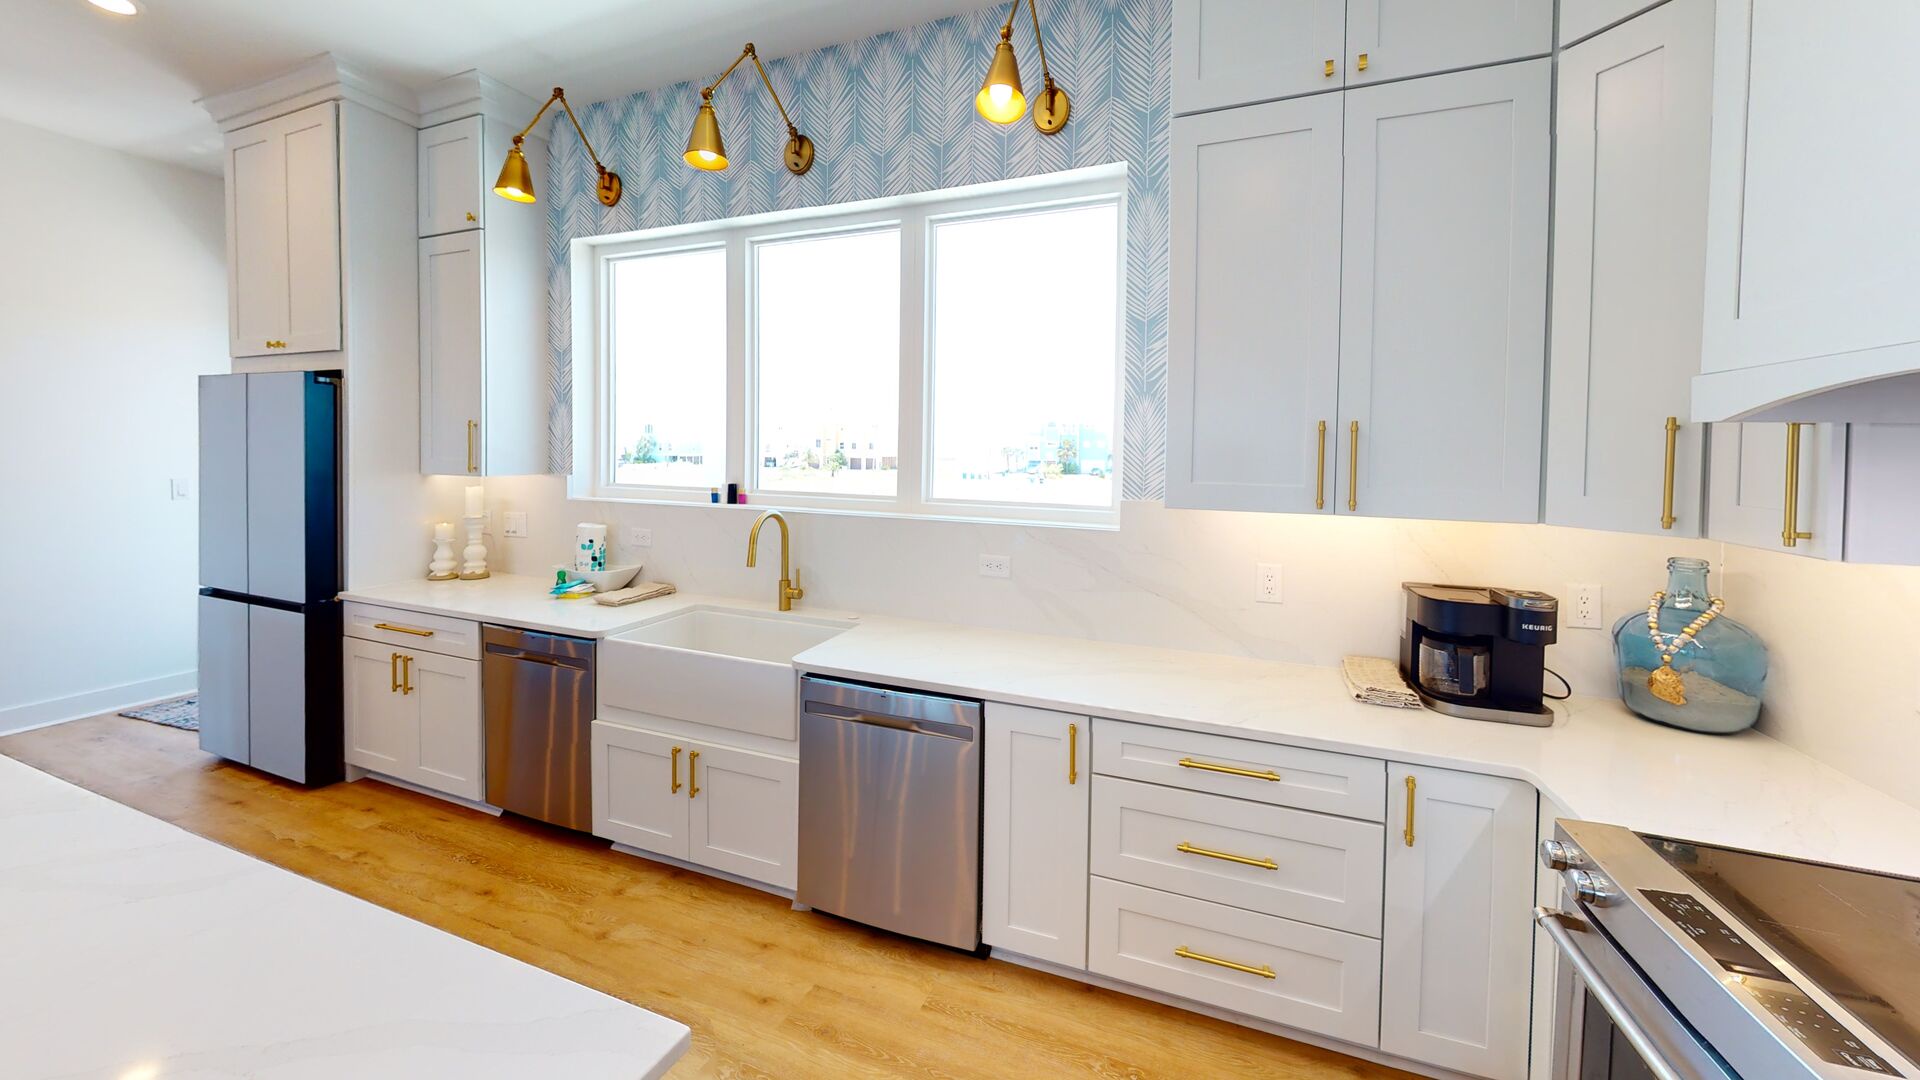 The gorgeous kitchen features 2 dishwashers, dedicated ice maker, pot filler and 2 refrigerators